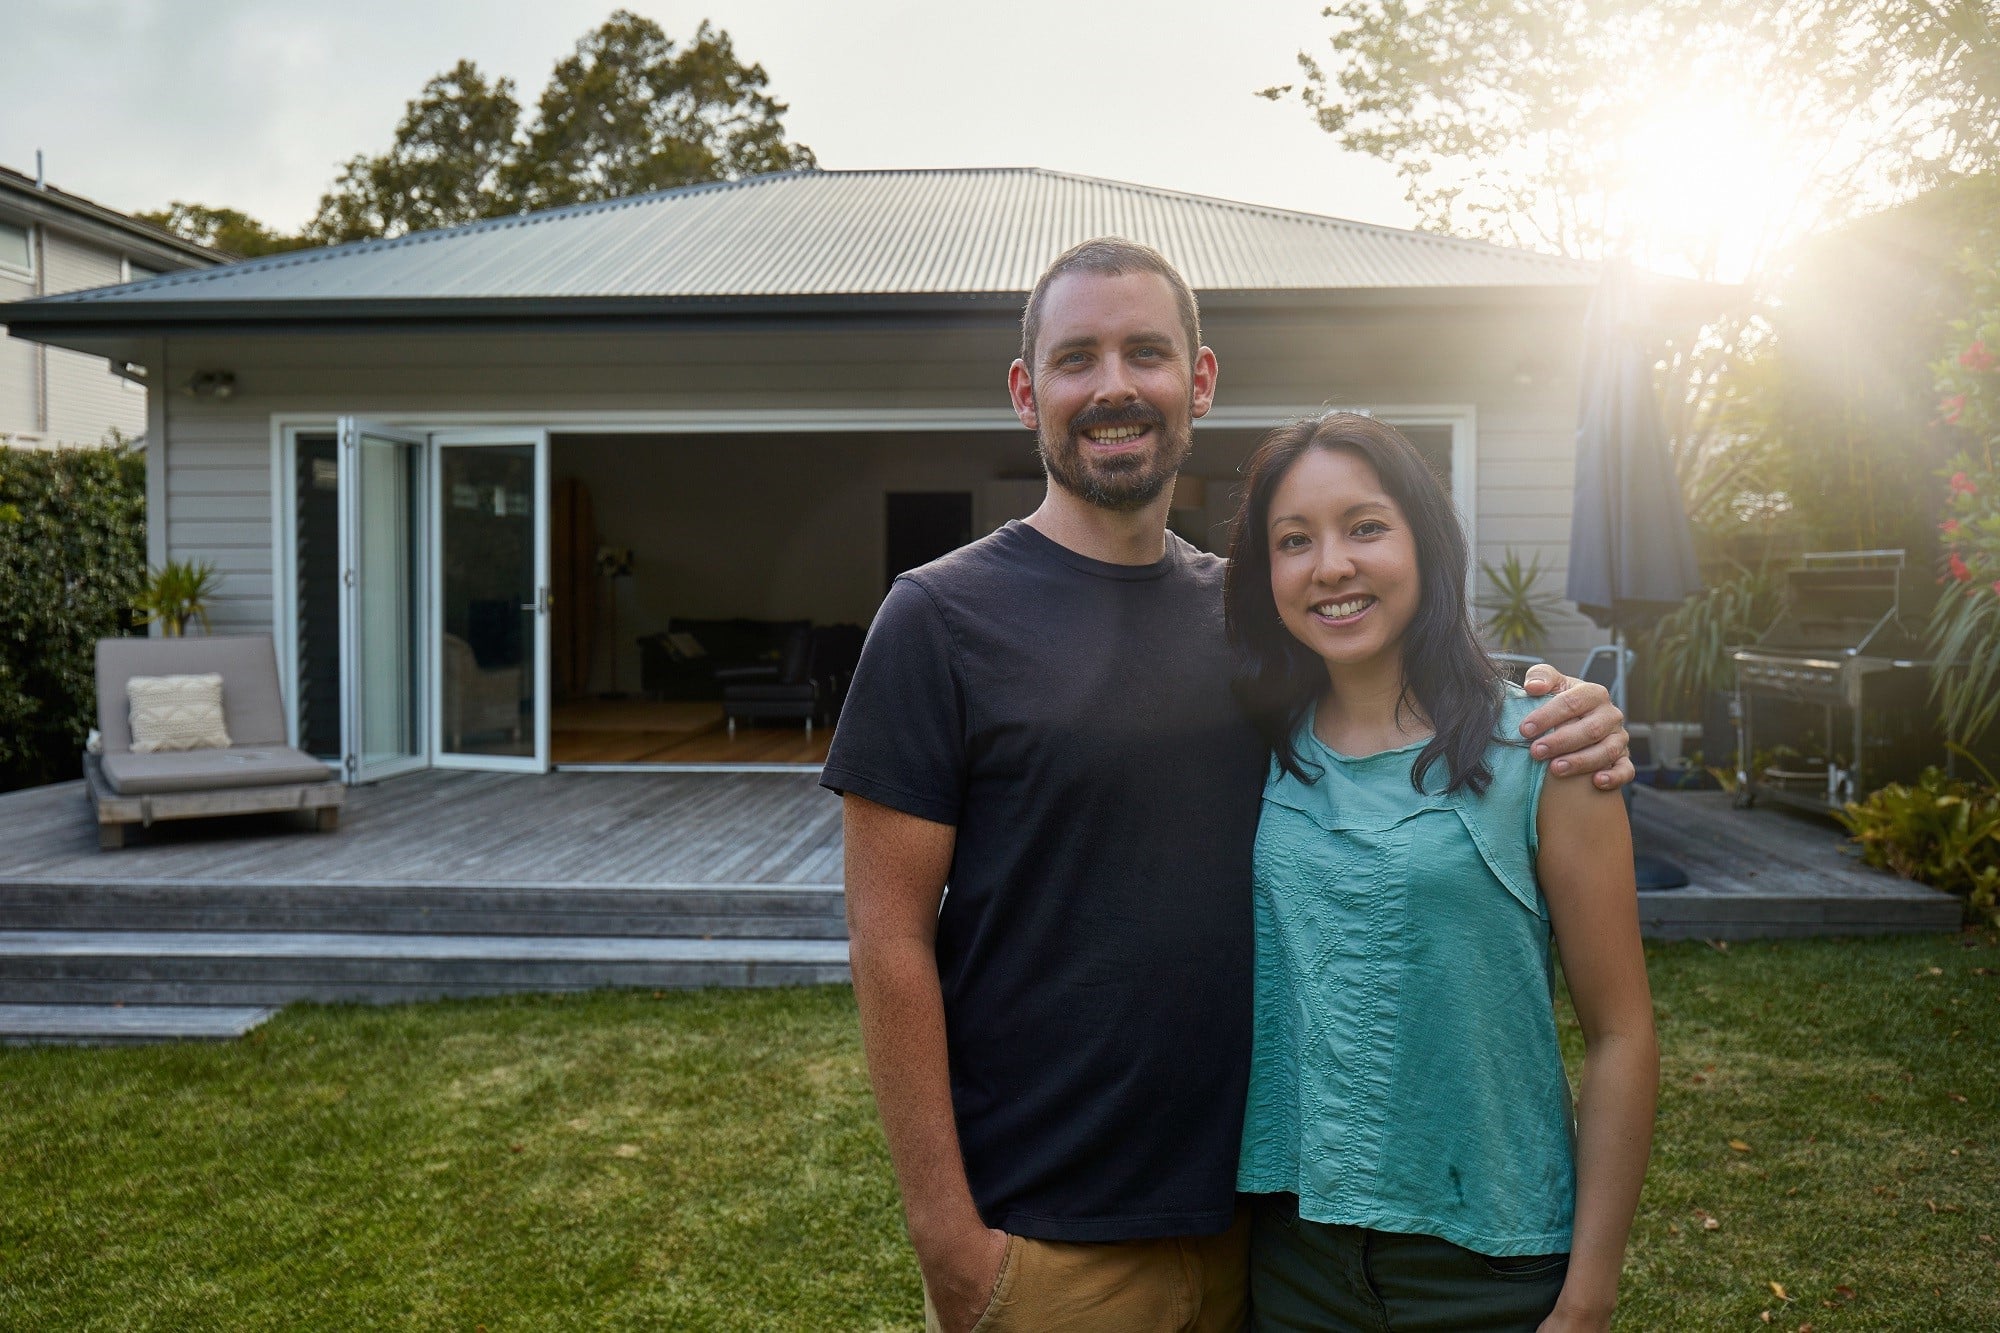 Portrait of smiling mid adult couple standing against house during sunset. Happy man and woman are in lawn at back yard. They are in casuals.